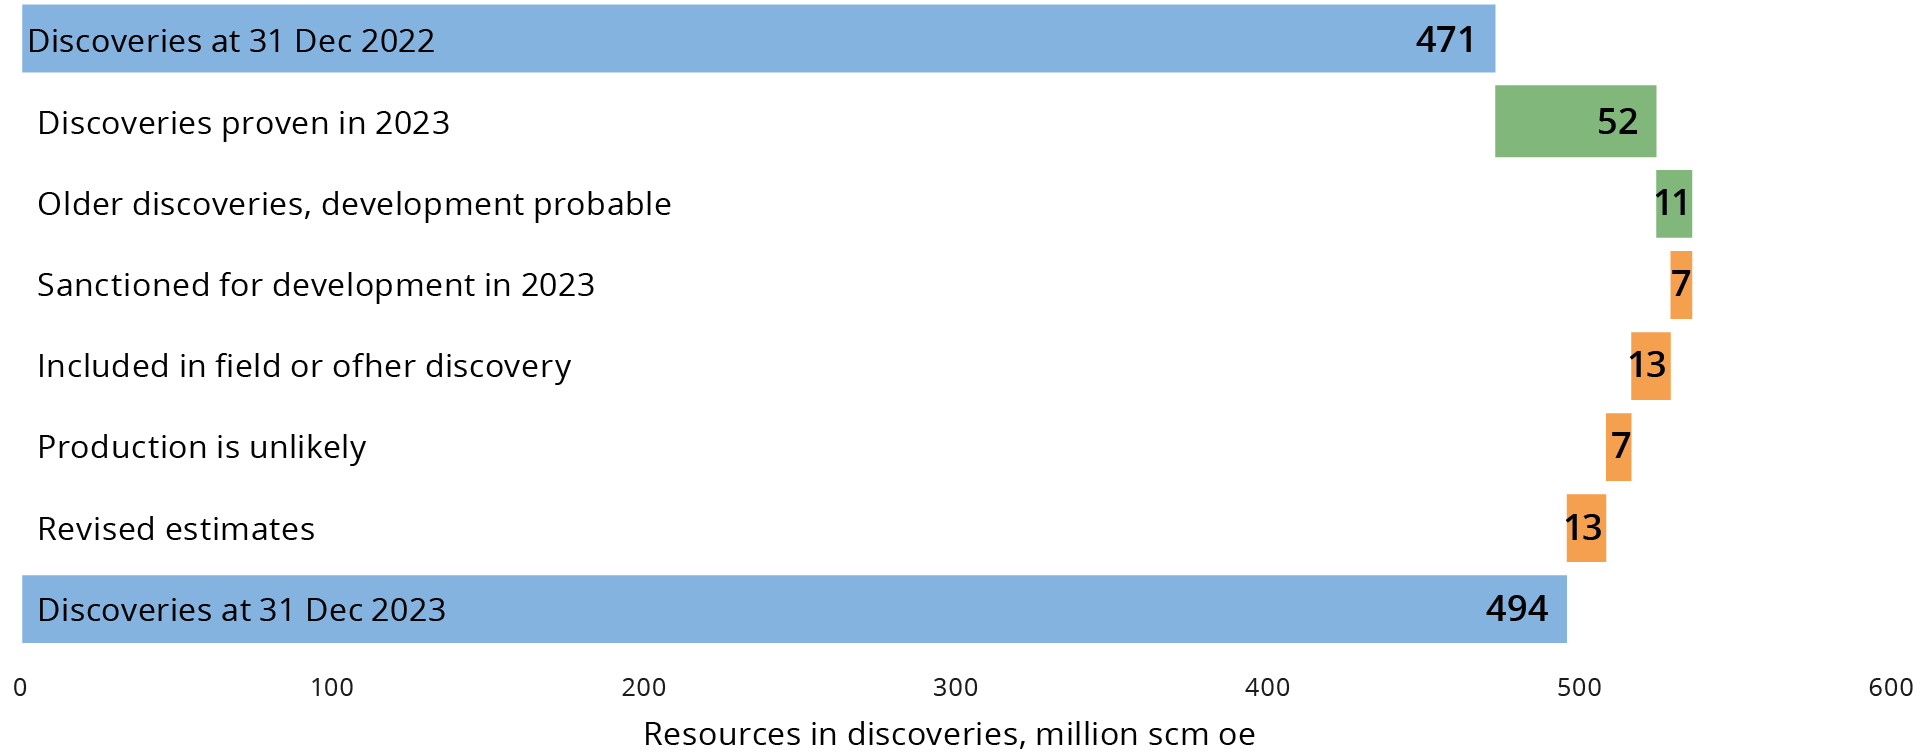 figure2-7-resources-in-discoveries.png